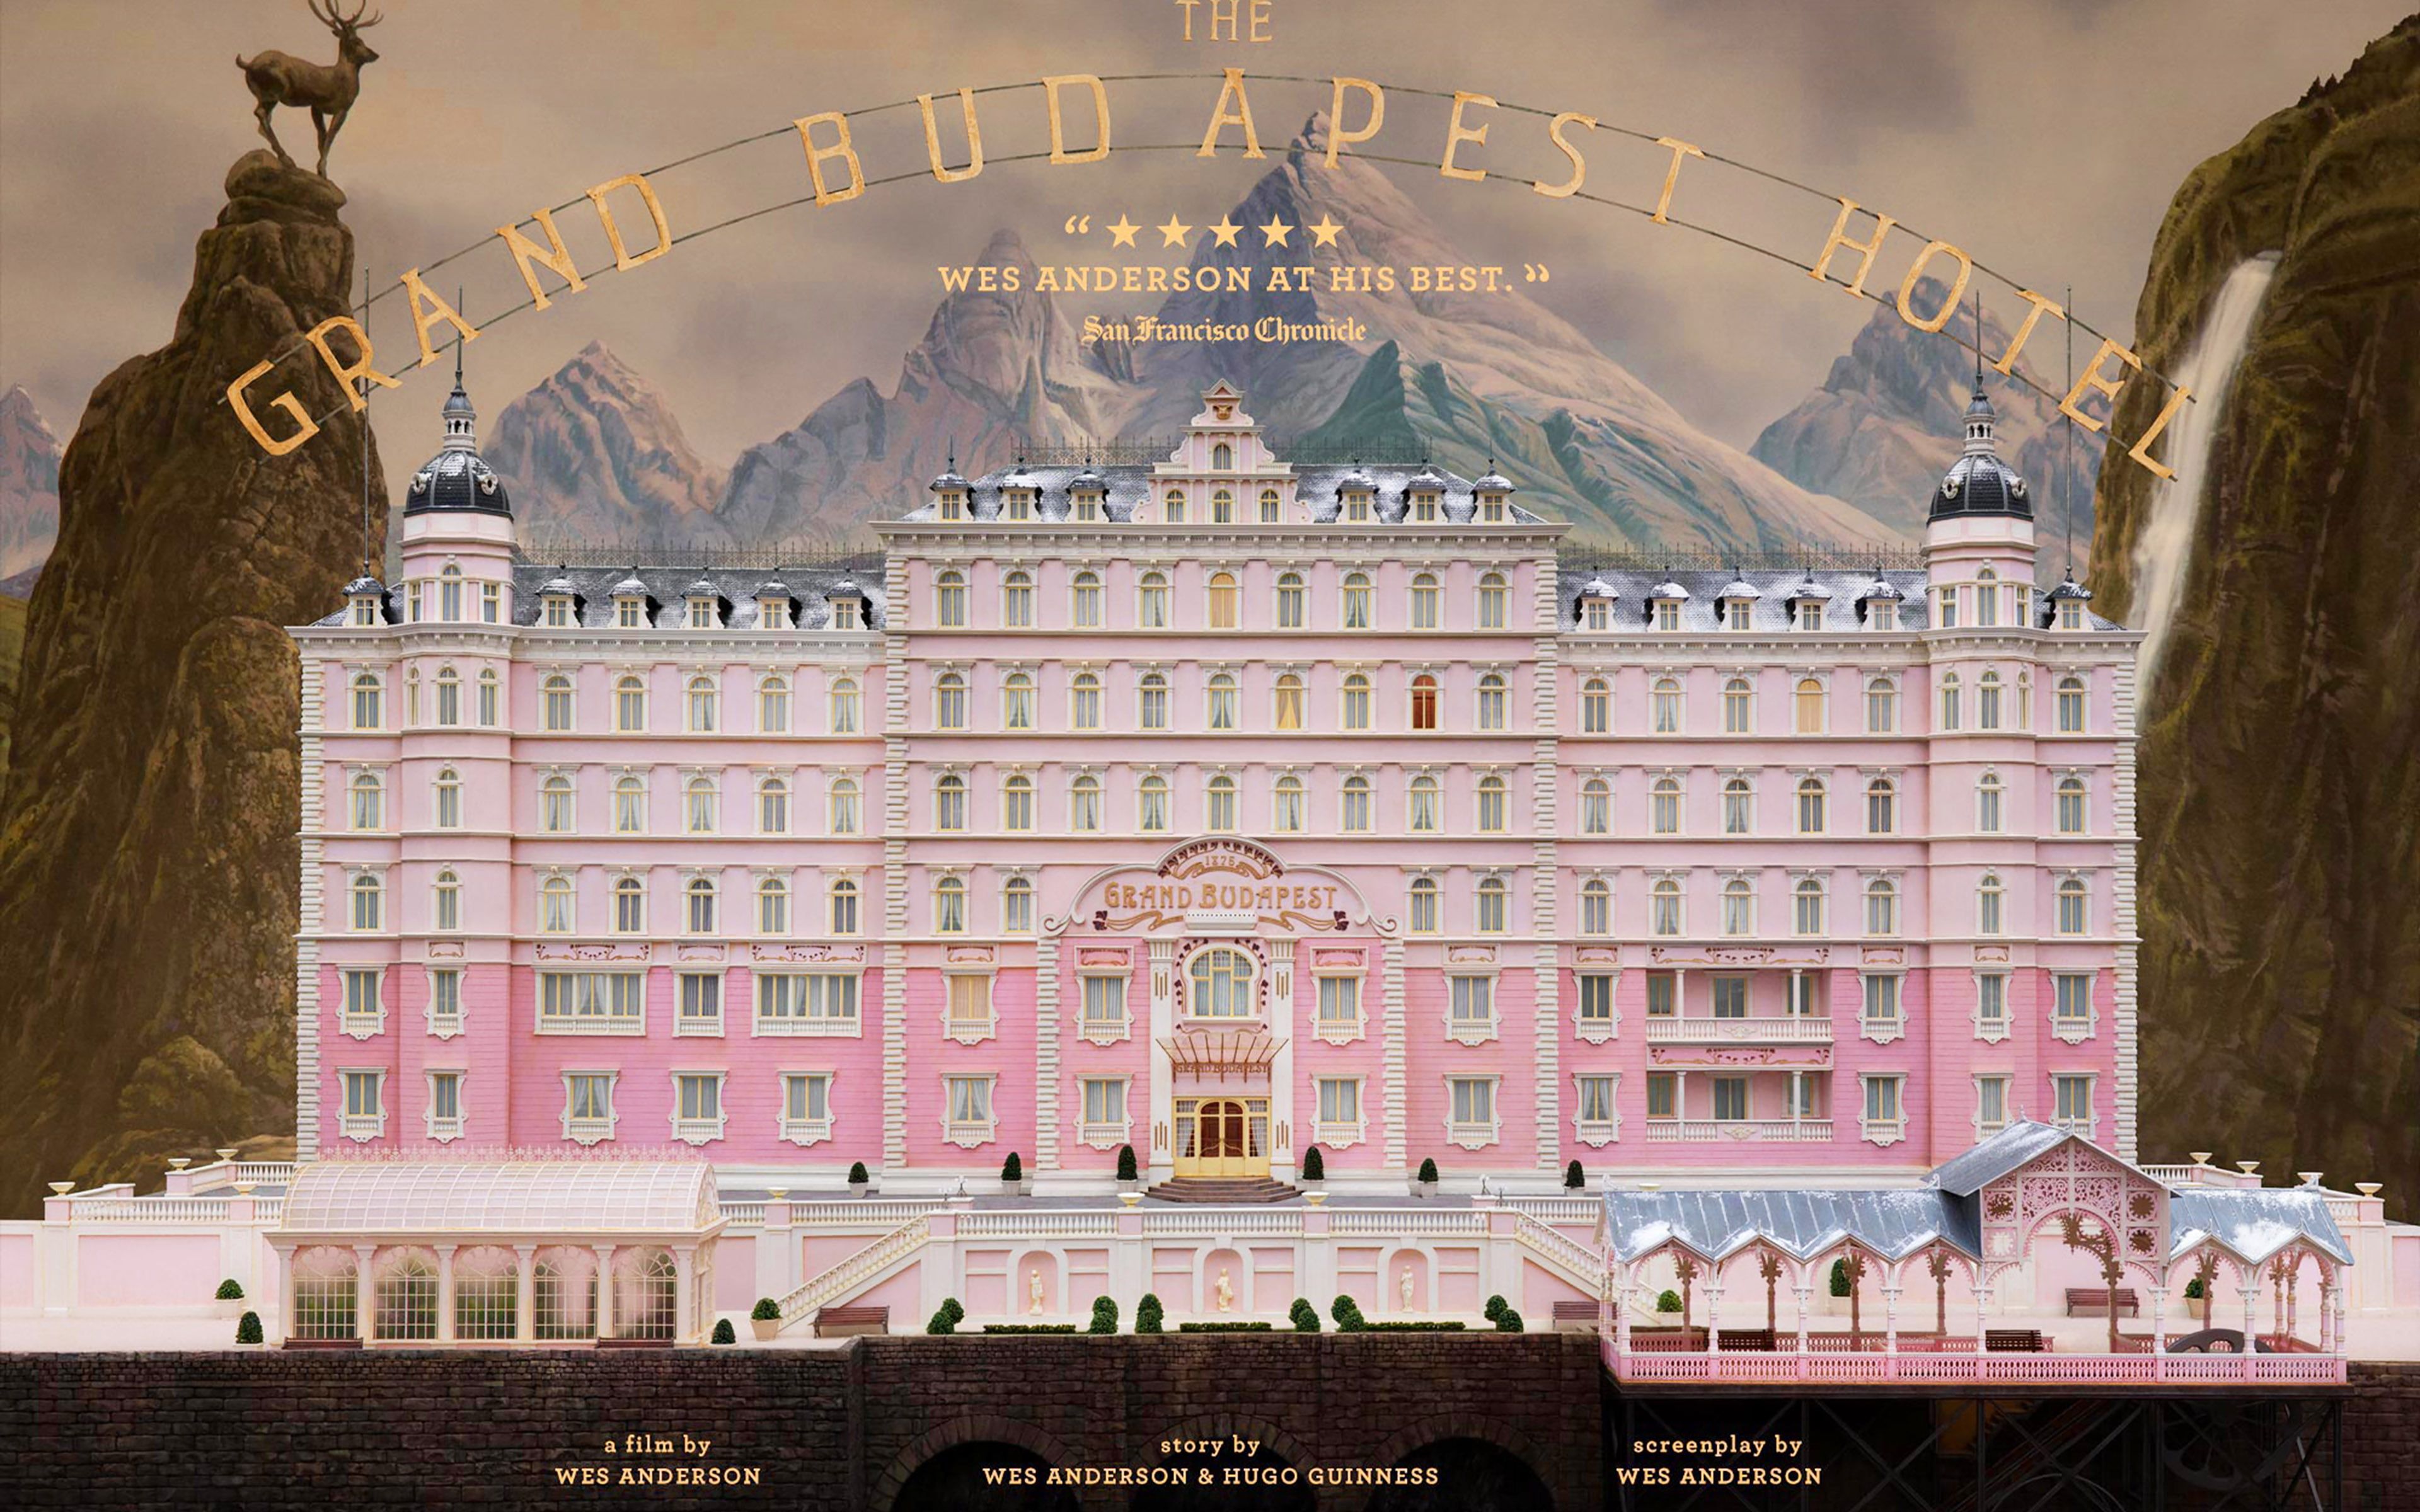 The Grand Budapest Hotel Wallpapers